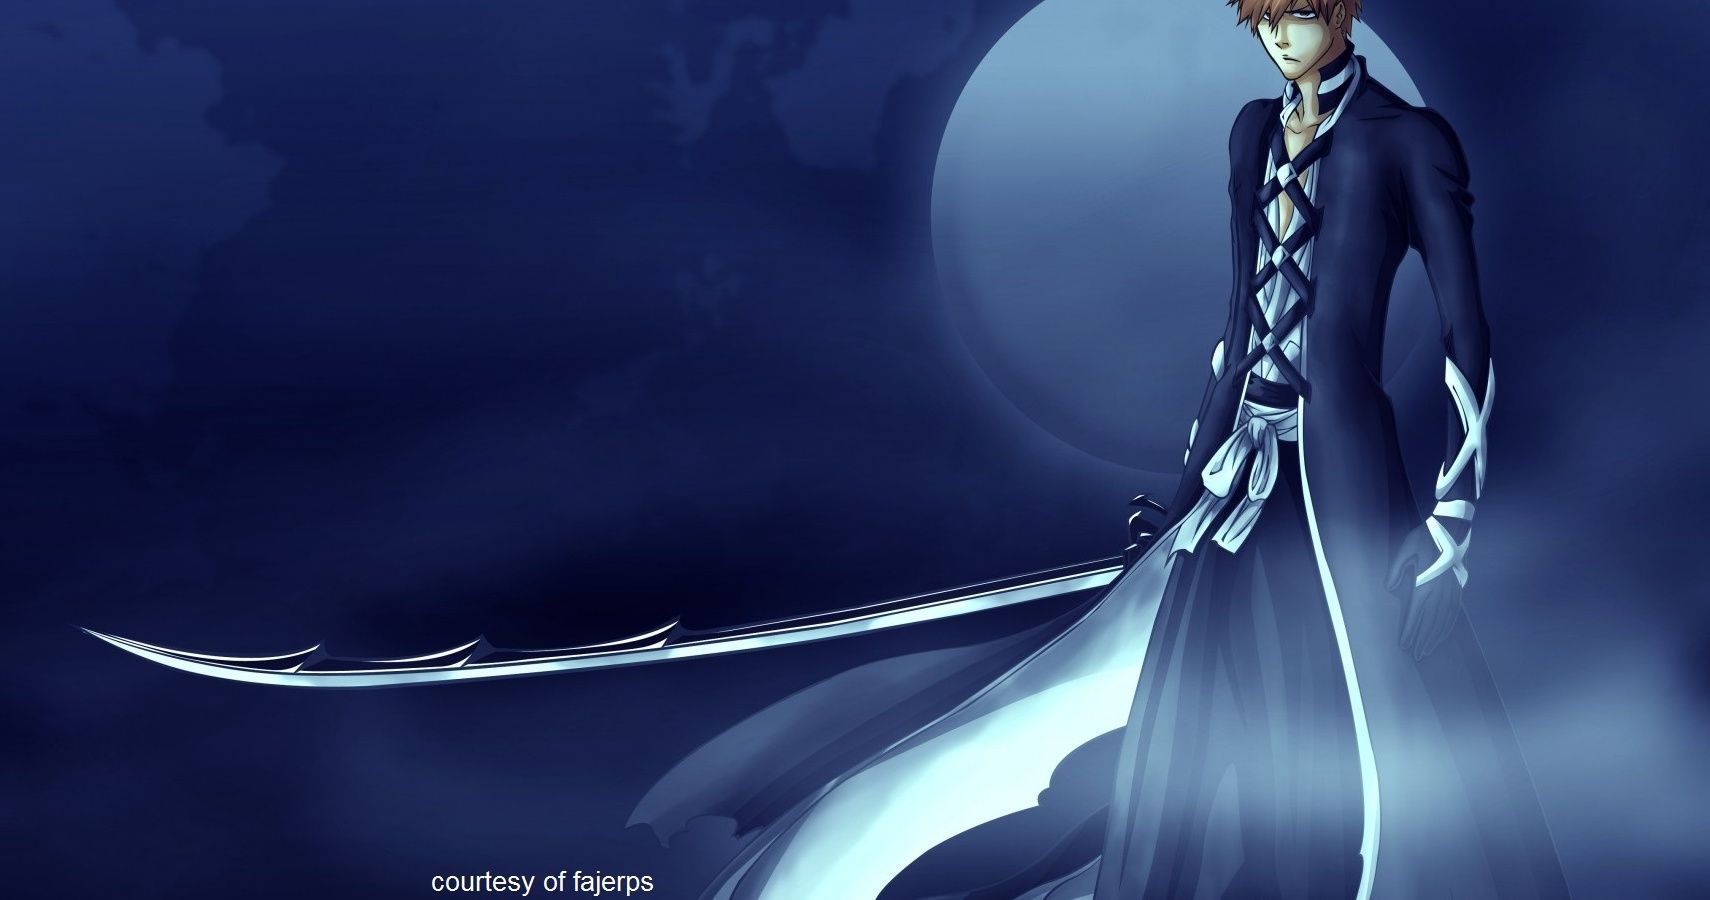 Top 10 Best Bleach Wallpapers HD  Anime, Bleach pictures, Bleach characters